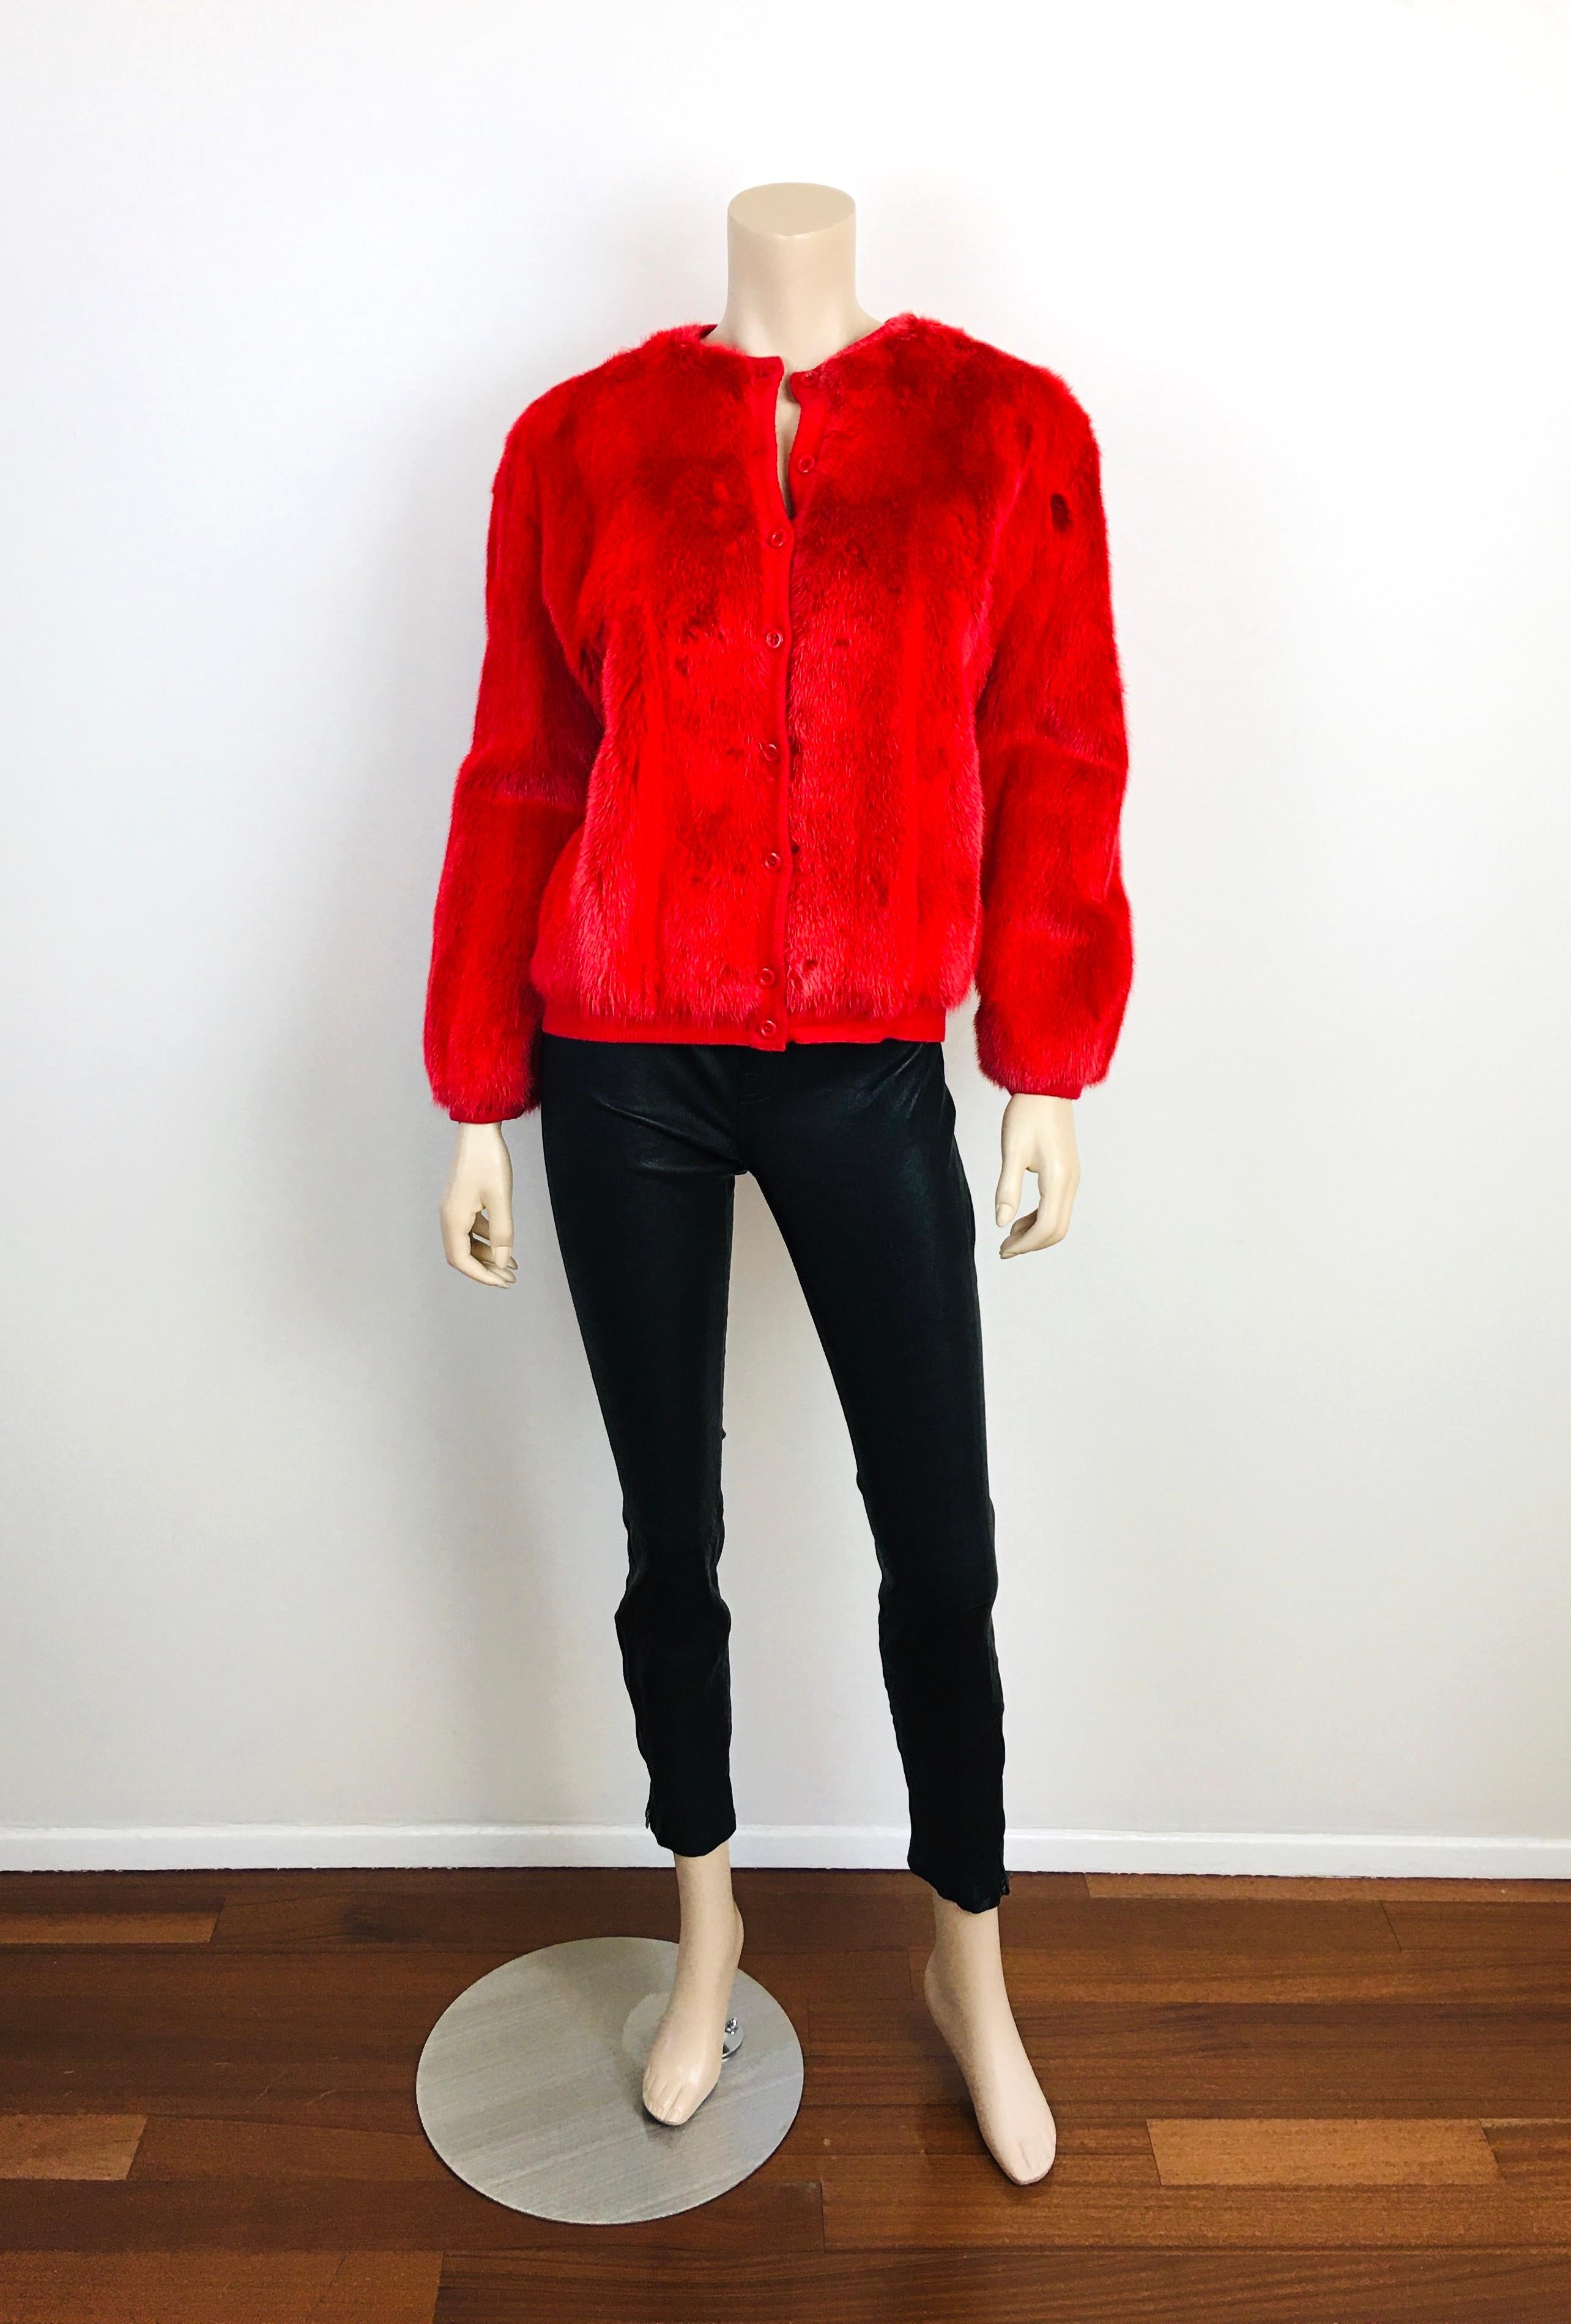 Vintage Red Mink Fur Bomber Style Sweater Jacket.
Buttons at front. 
Hidden pockets.
Loose fit bomber style.
bright red mink fur with sweater knit trim, lined 
By Evans.
Appx size - S / M
21